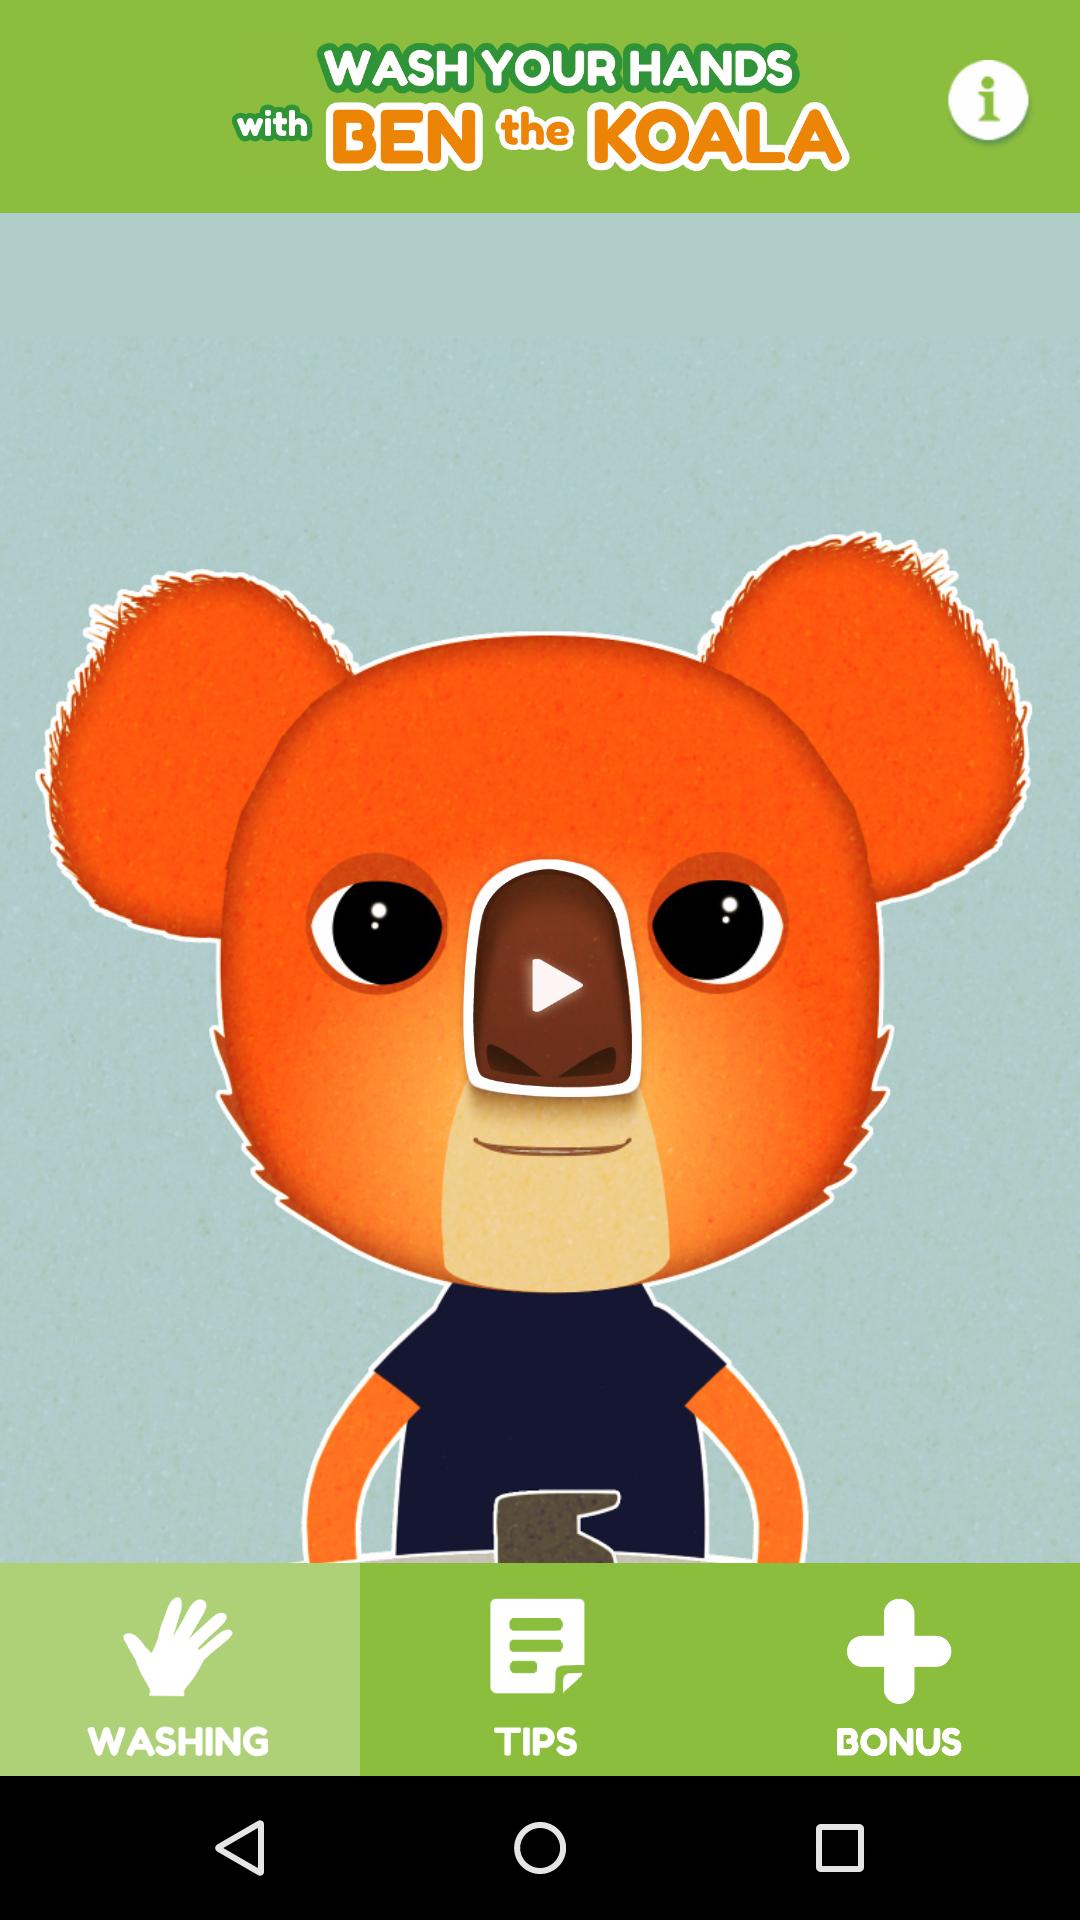 Wash Your Hands Ben The Koala for Android - APK Download